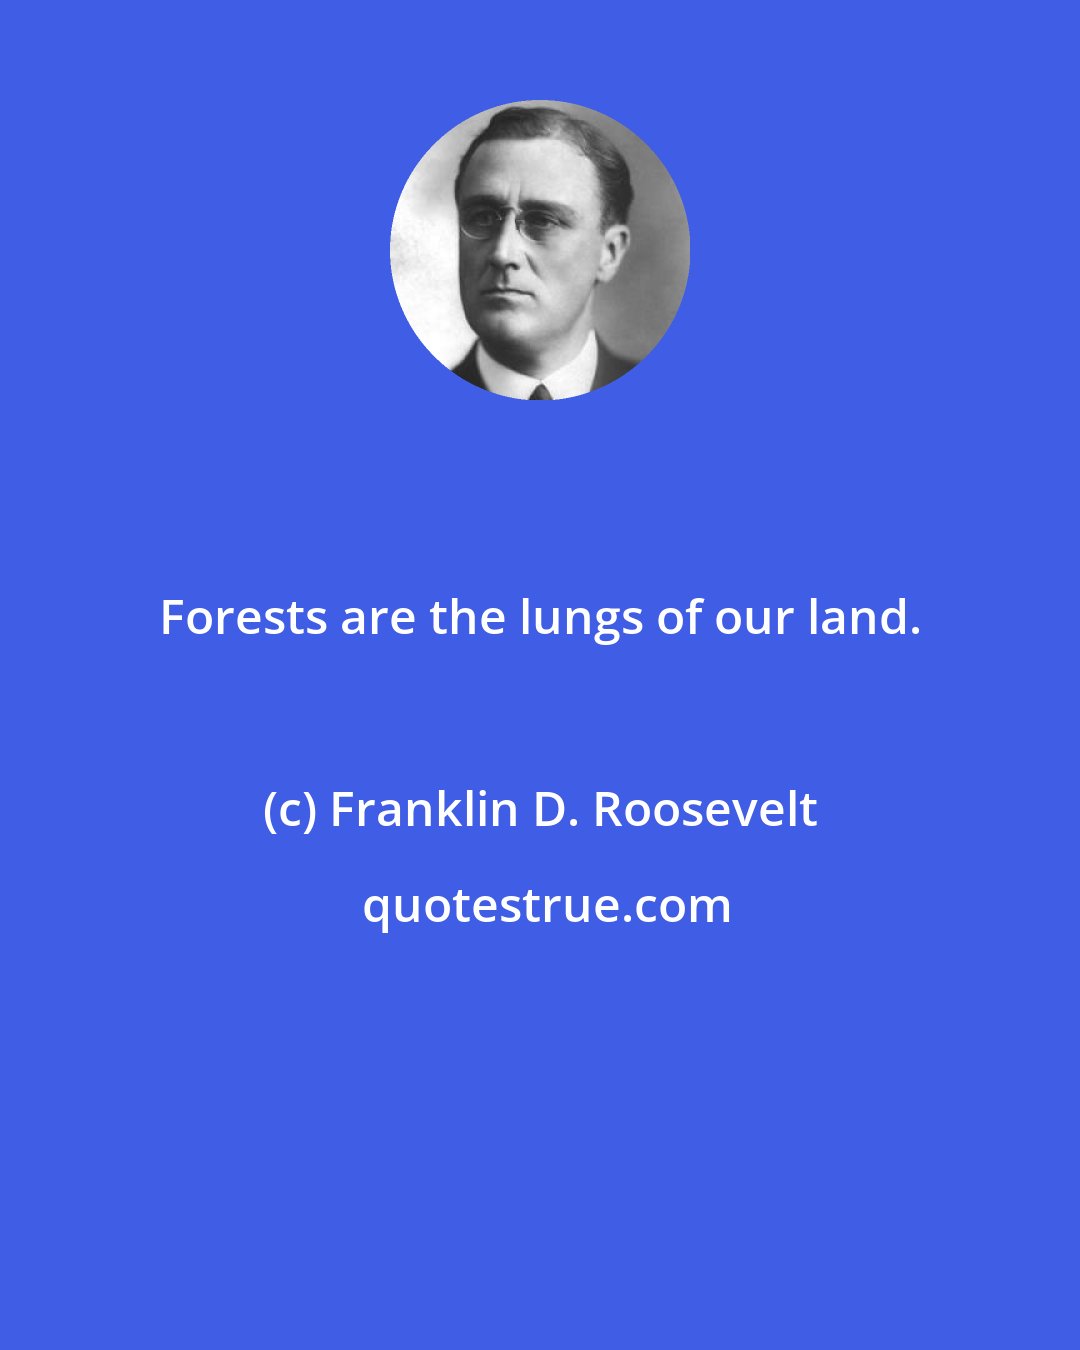 Franklin D. Roosevelt: Forests are the lungs of our land.